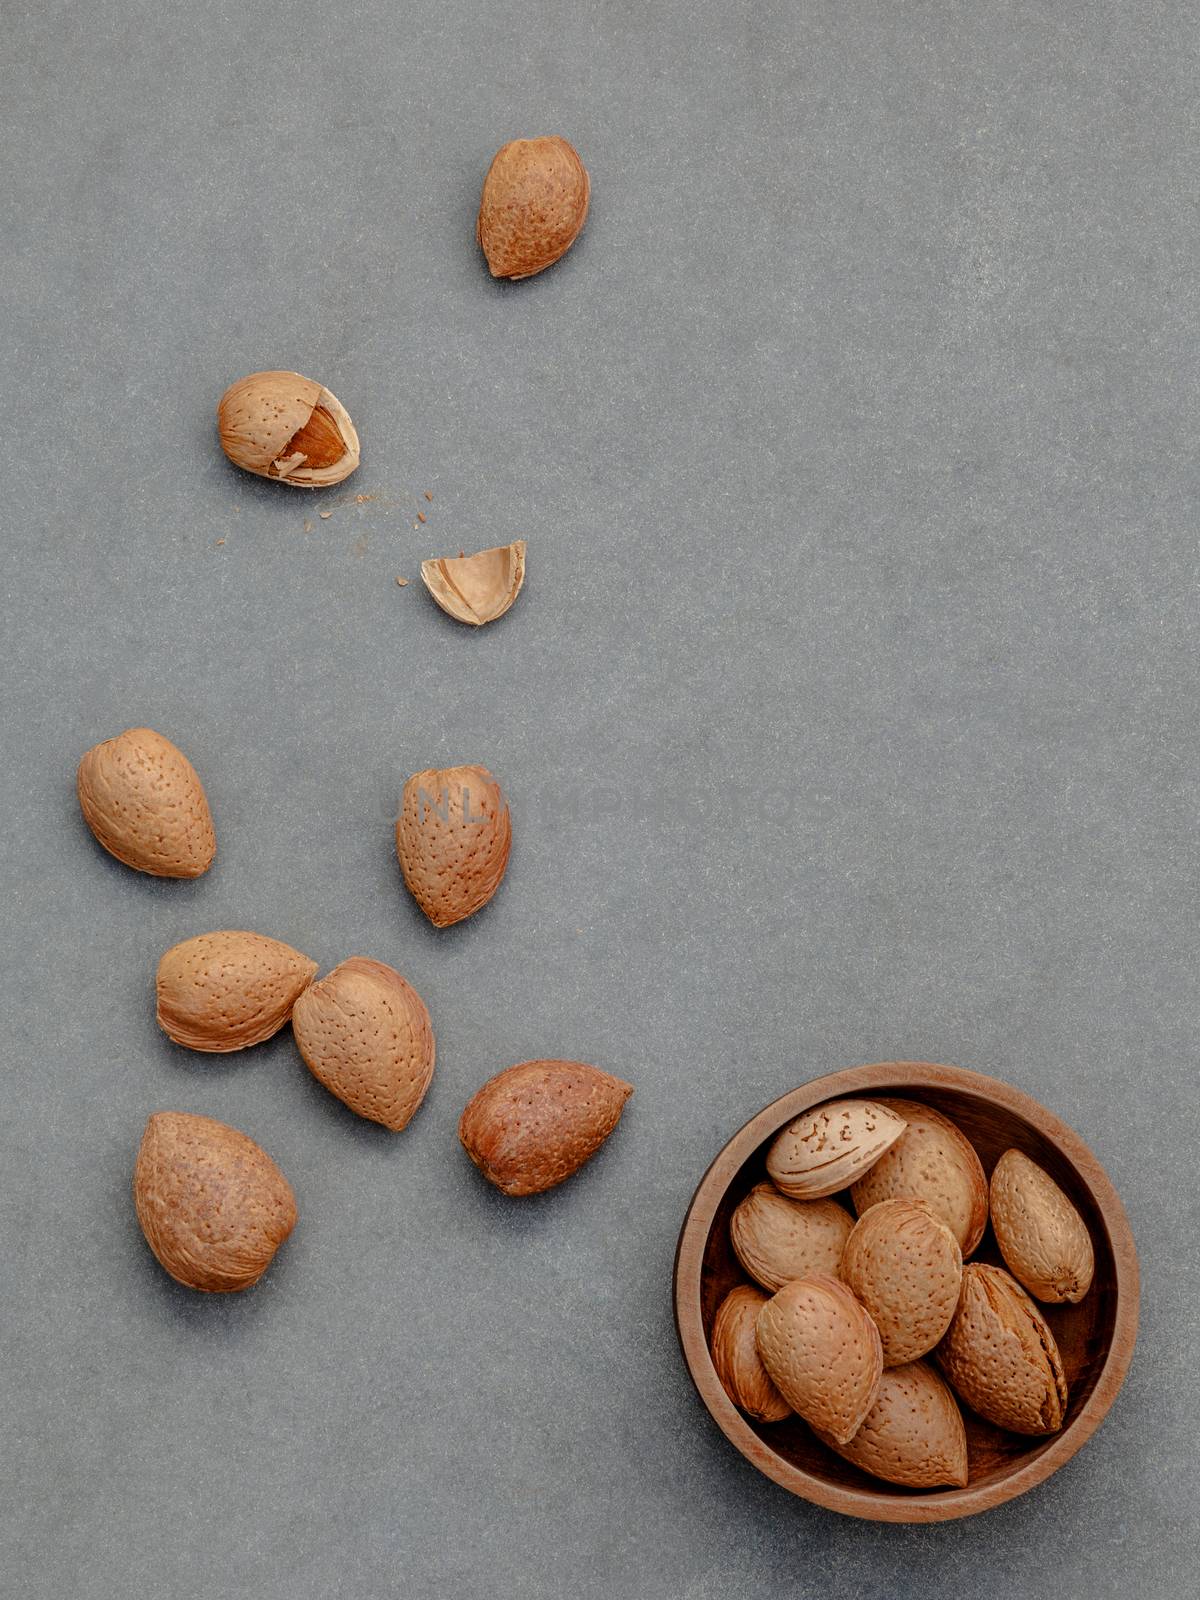 Almonds kernels and whole almonds on concrete background. Whole  by kerdkanno